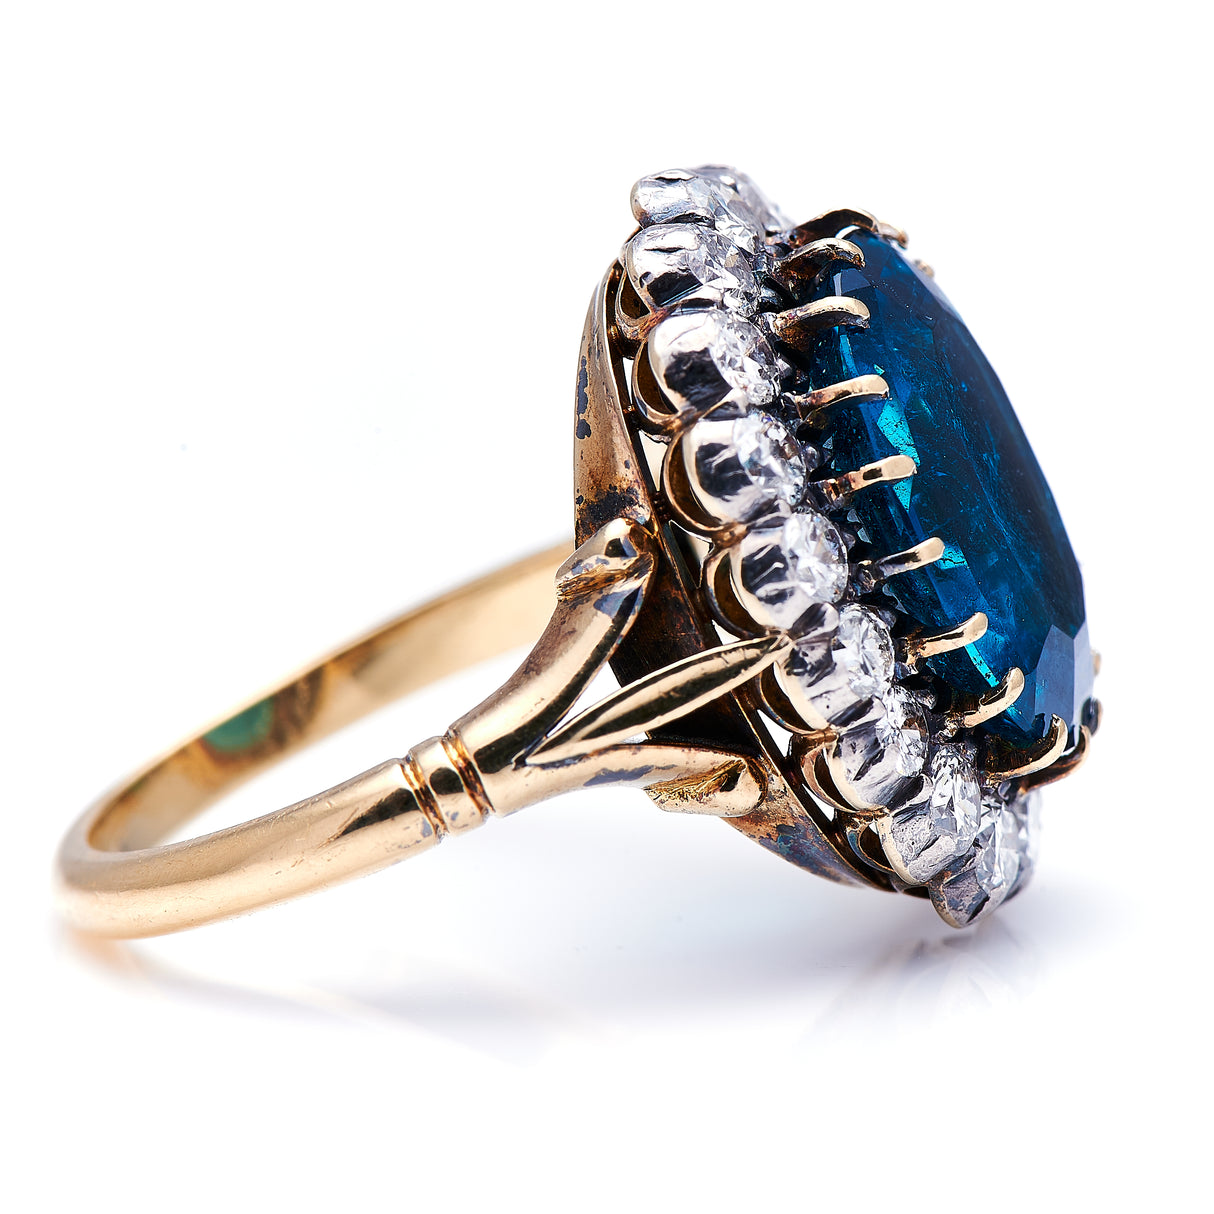 Edwardian, 18ct Gold, Extraordinary Indicolite Tourmaline and Diamond Cluster Ring